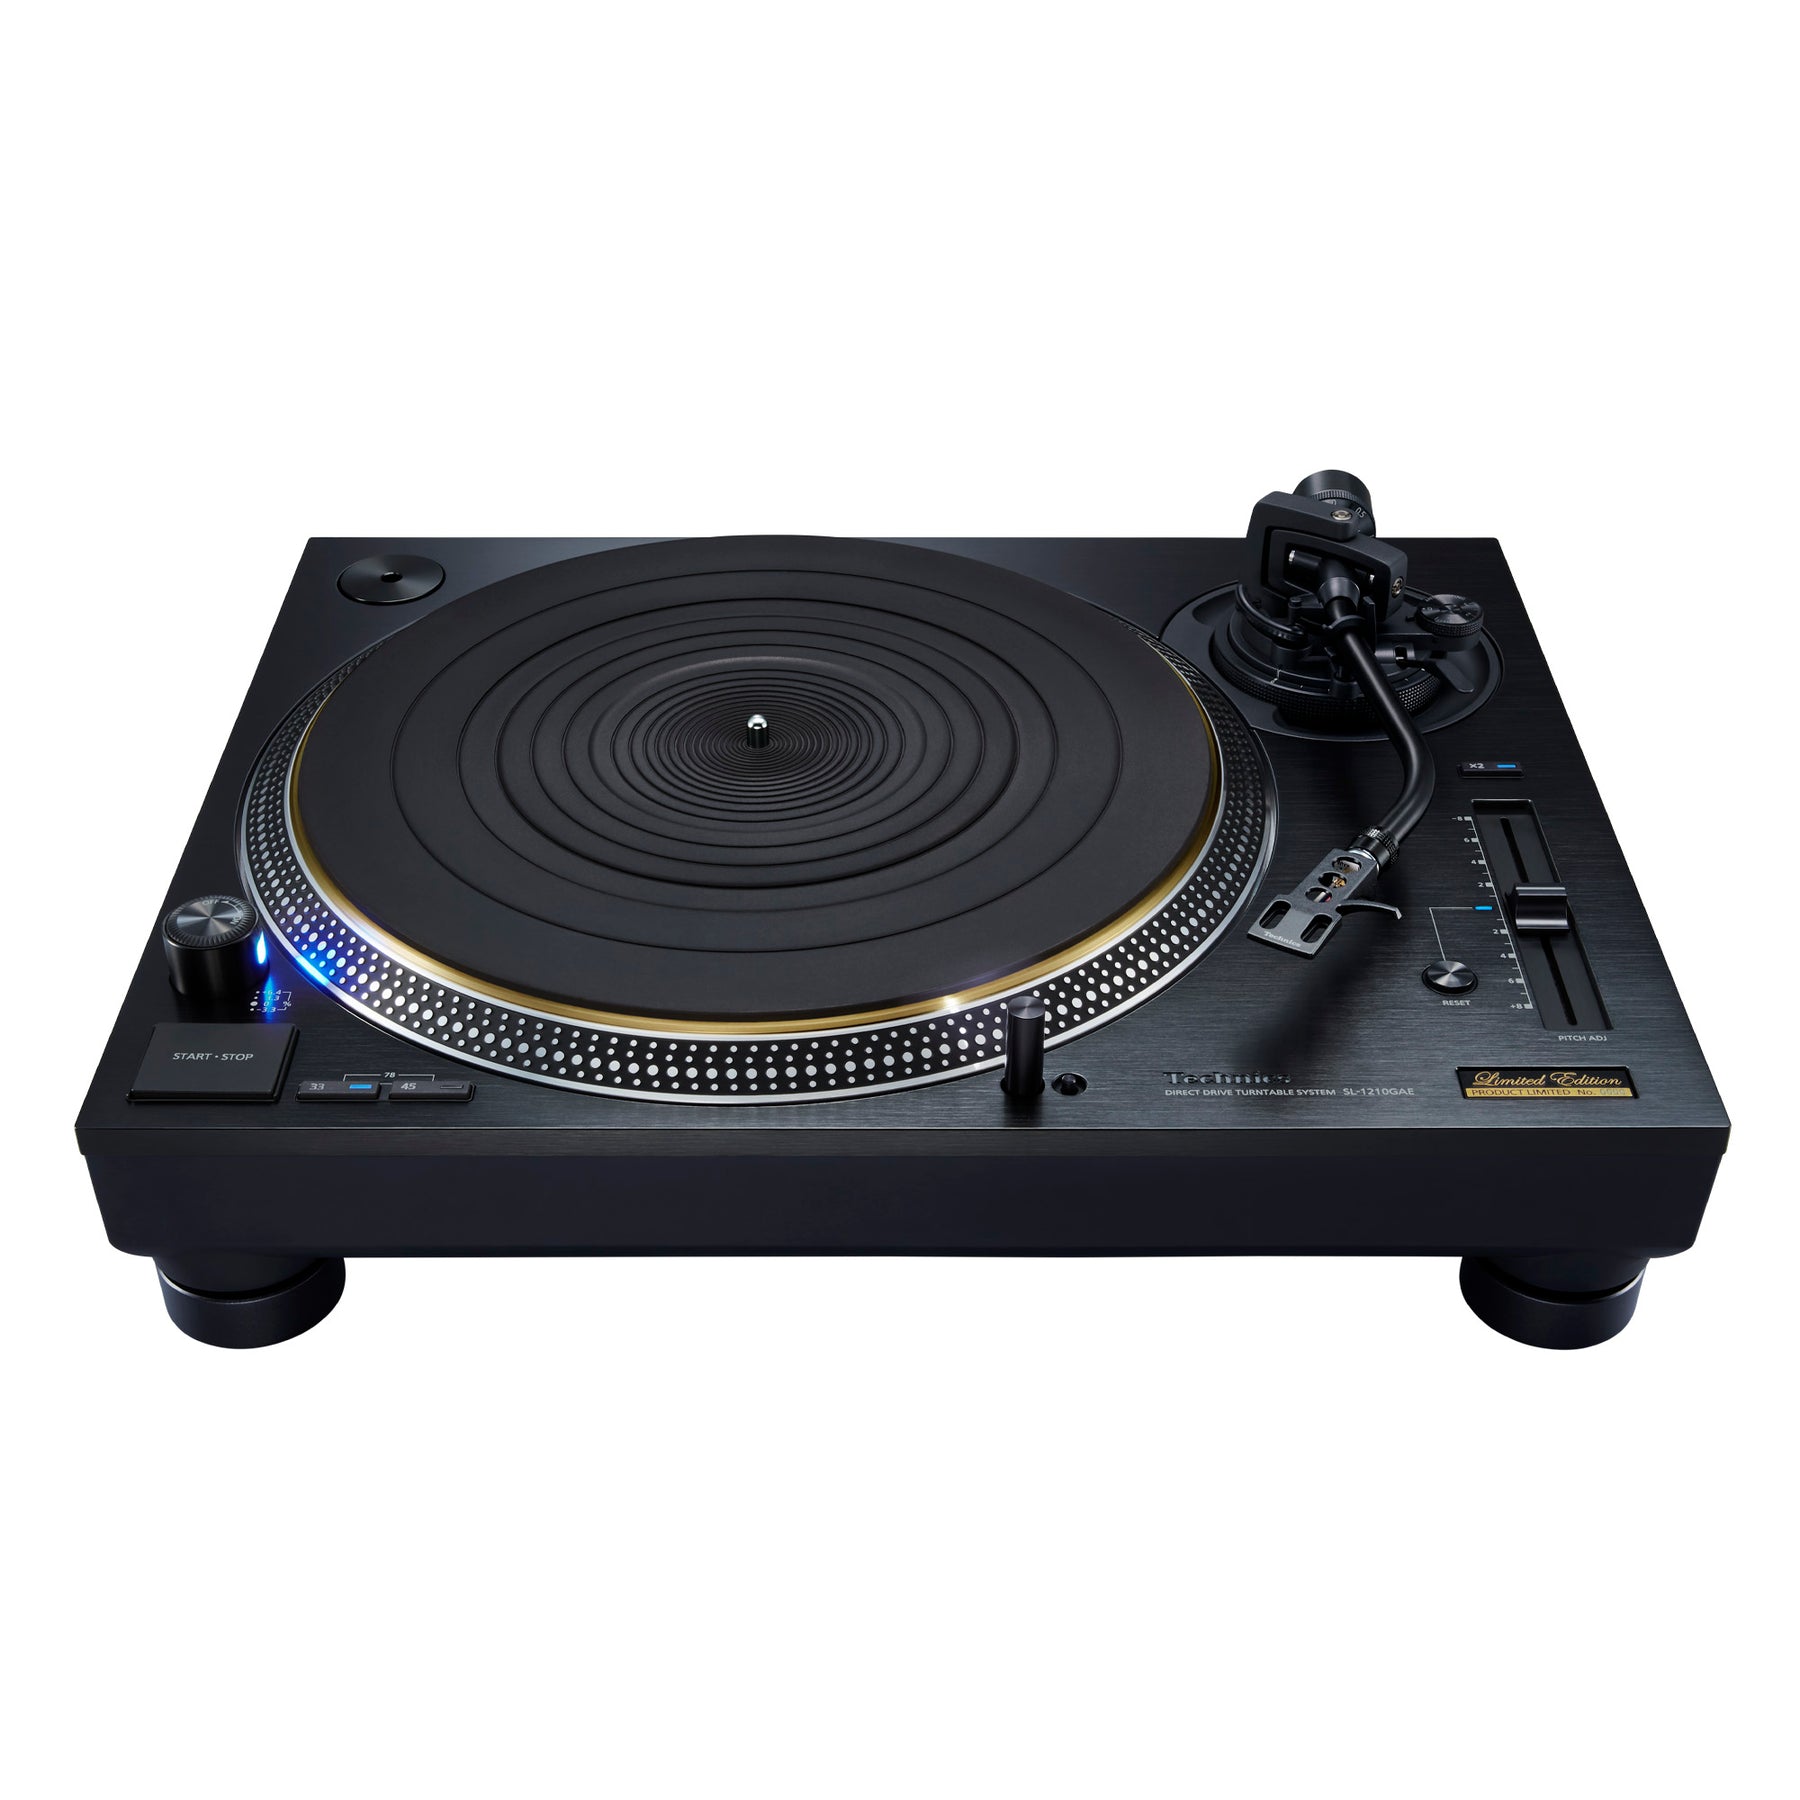 55th Anniversary Limited Edition Direct Drive Turntable System SL-1210GAE